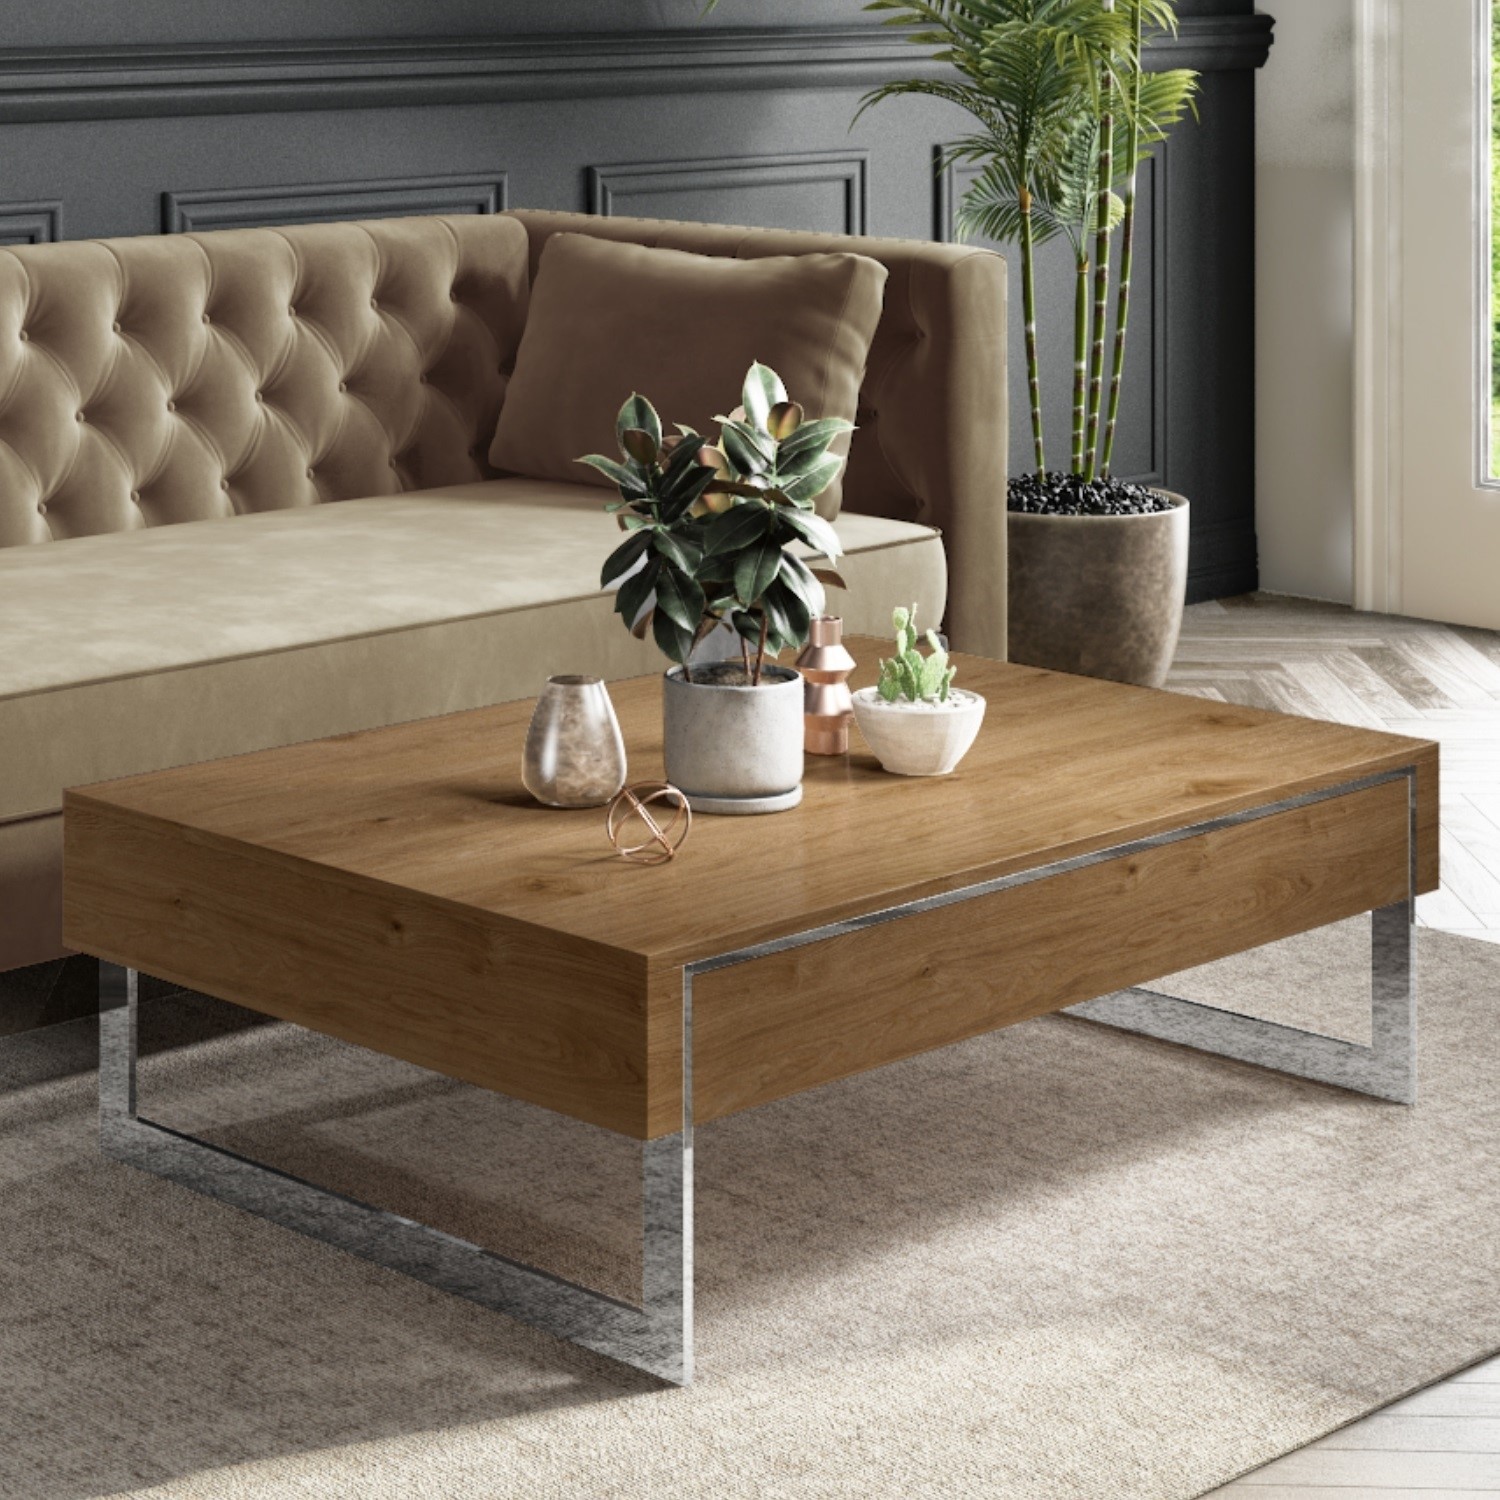 Photo of Large oak effect coffee table with drawer - tiffany